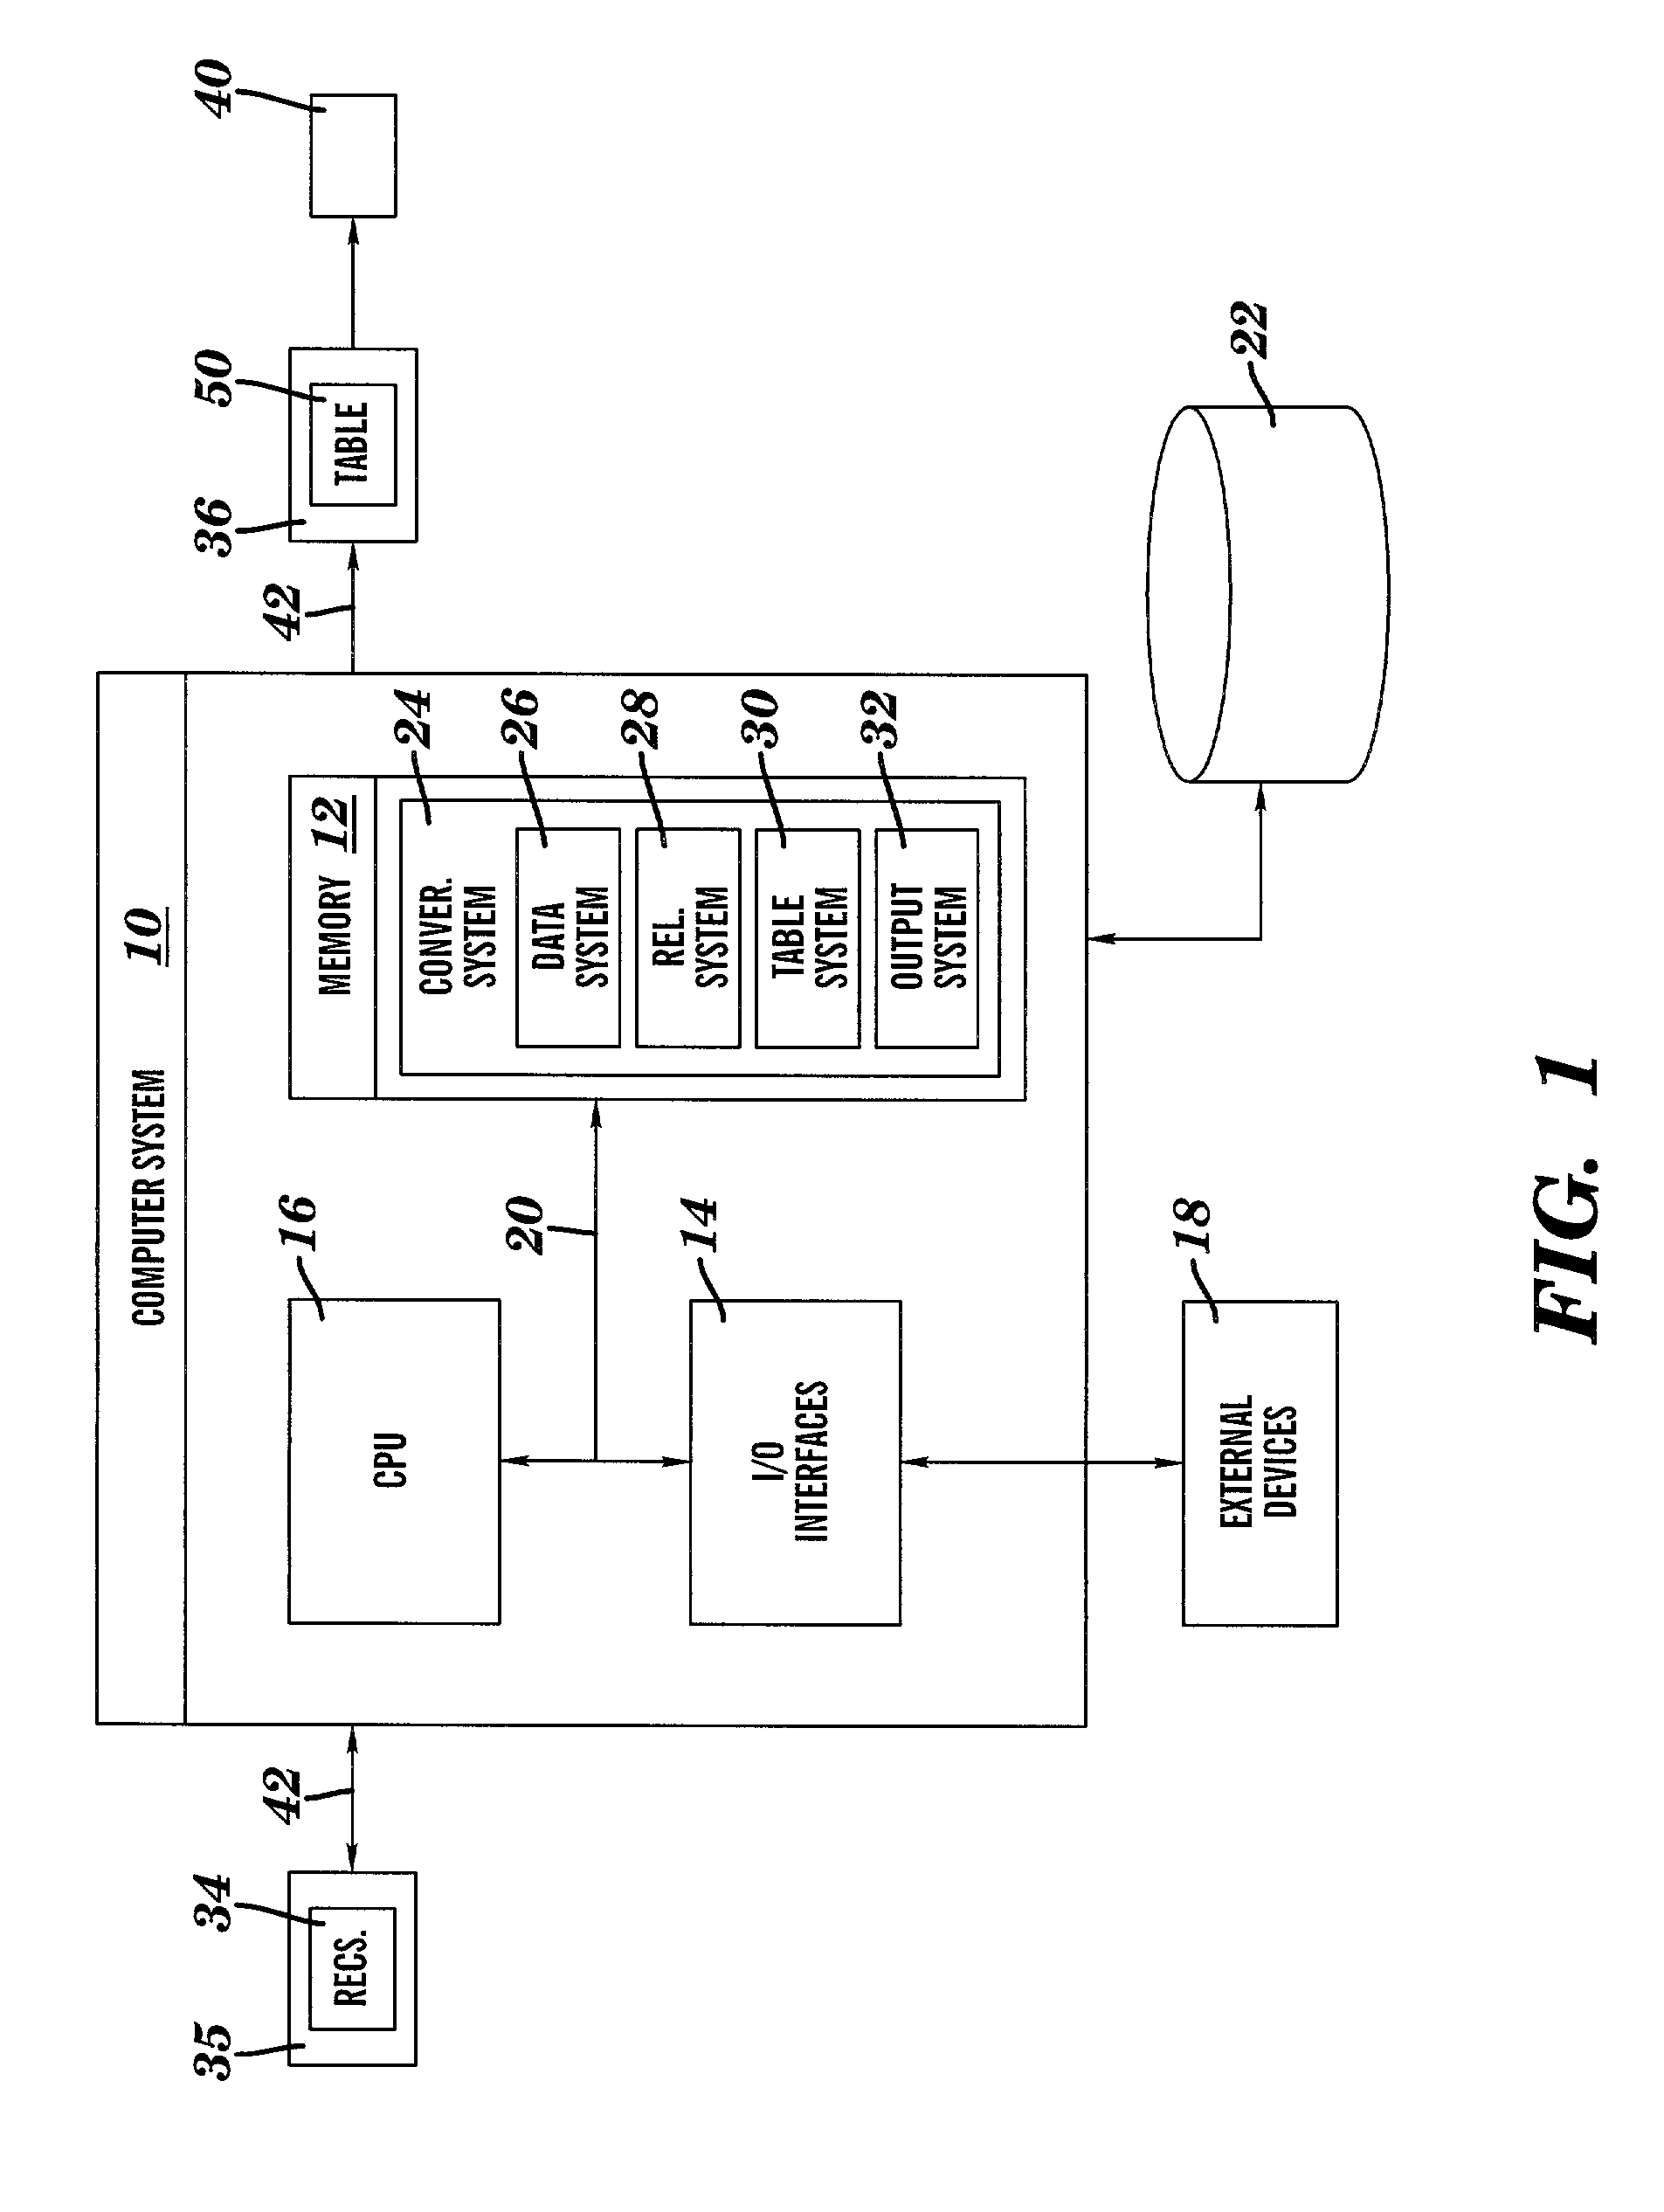 Data conversion system and method